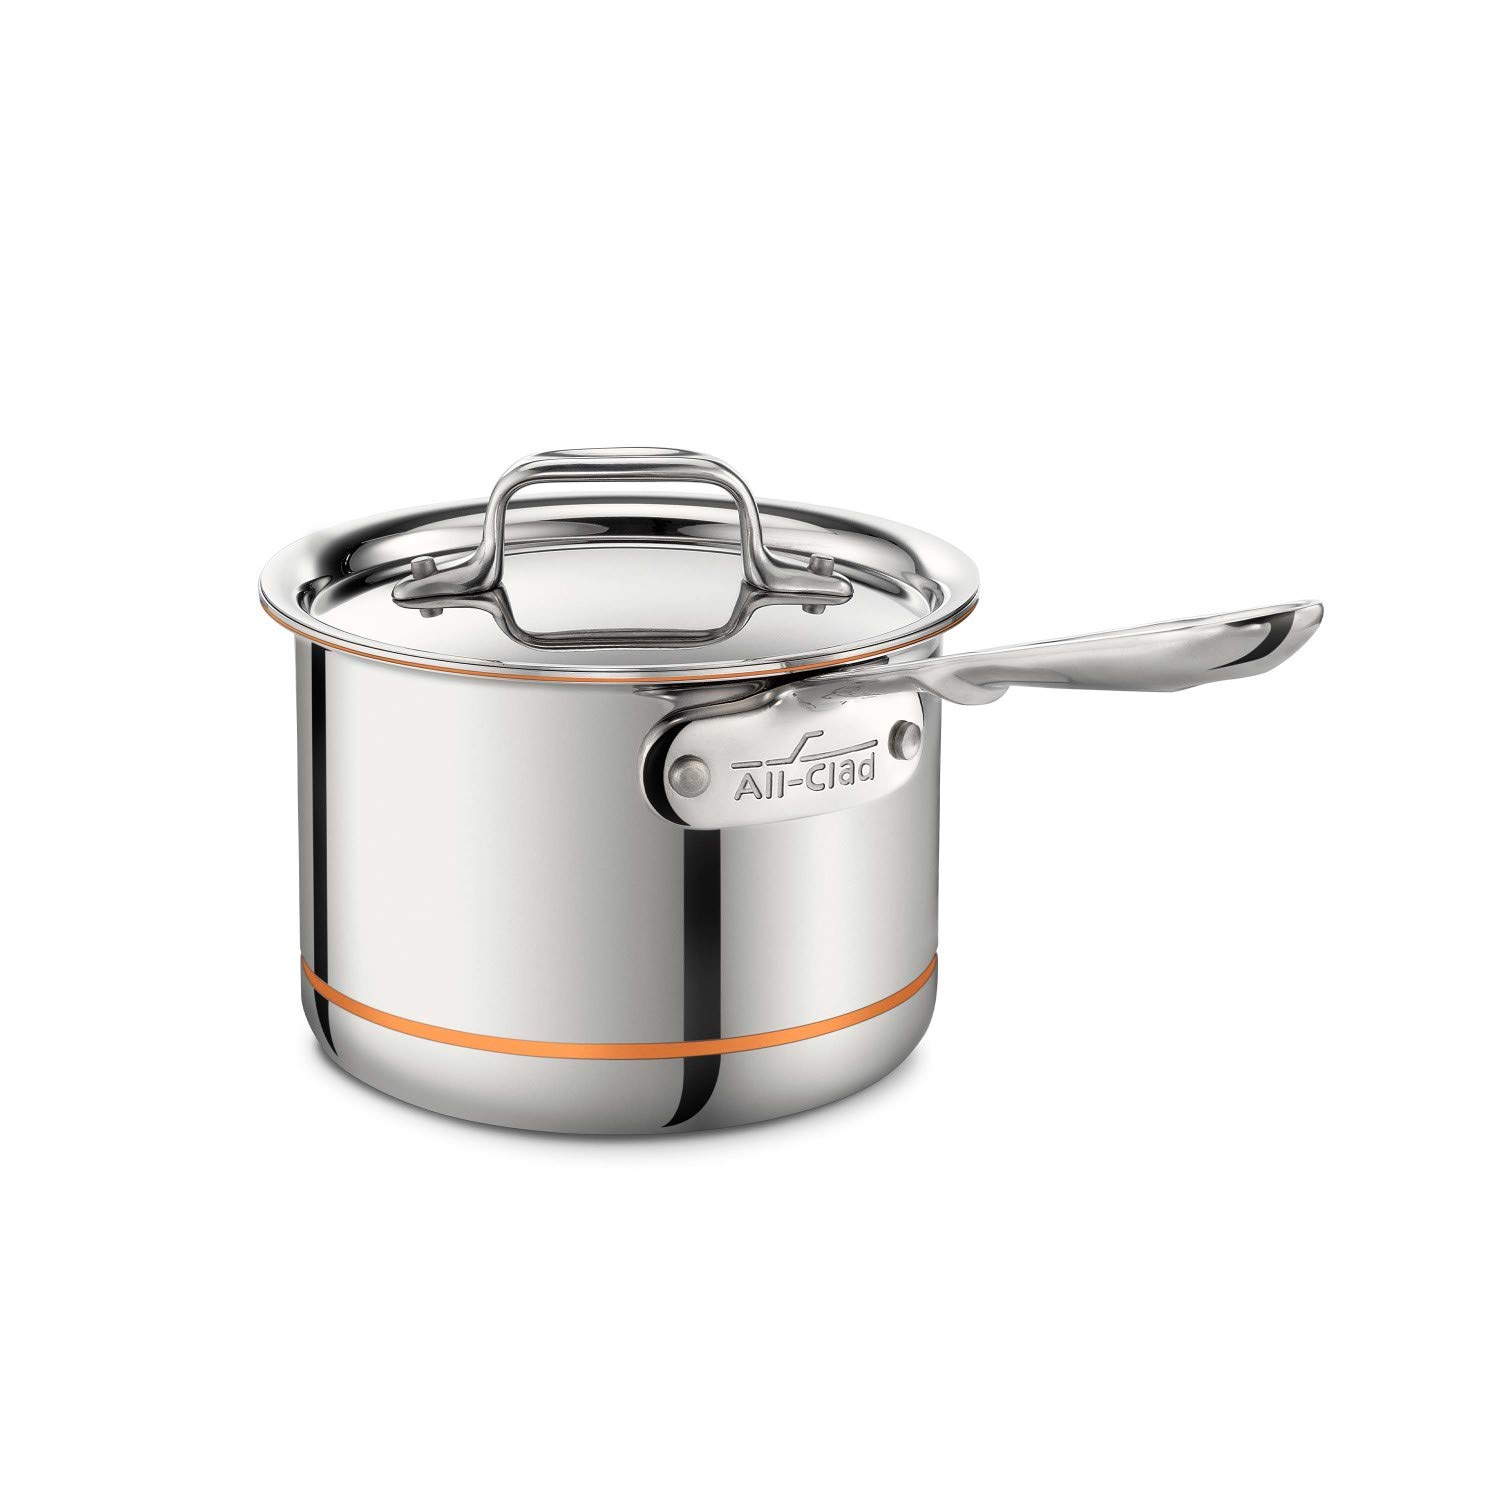 All-Clad 6202 SS Copper Core 5-Ply Bonded Dishwasher Safe Saucepan / Cookware, 2-Quart, Silver,8700800027